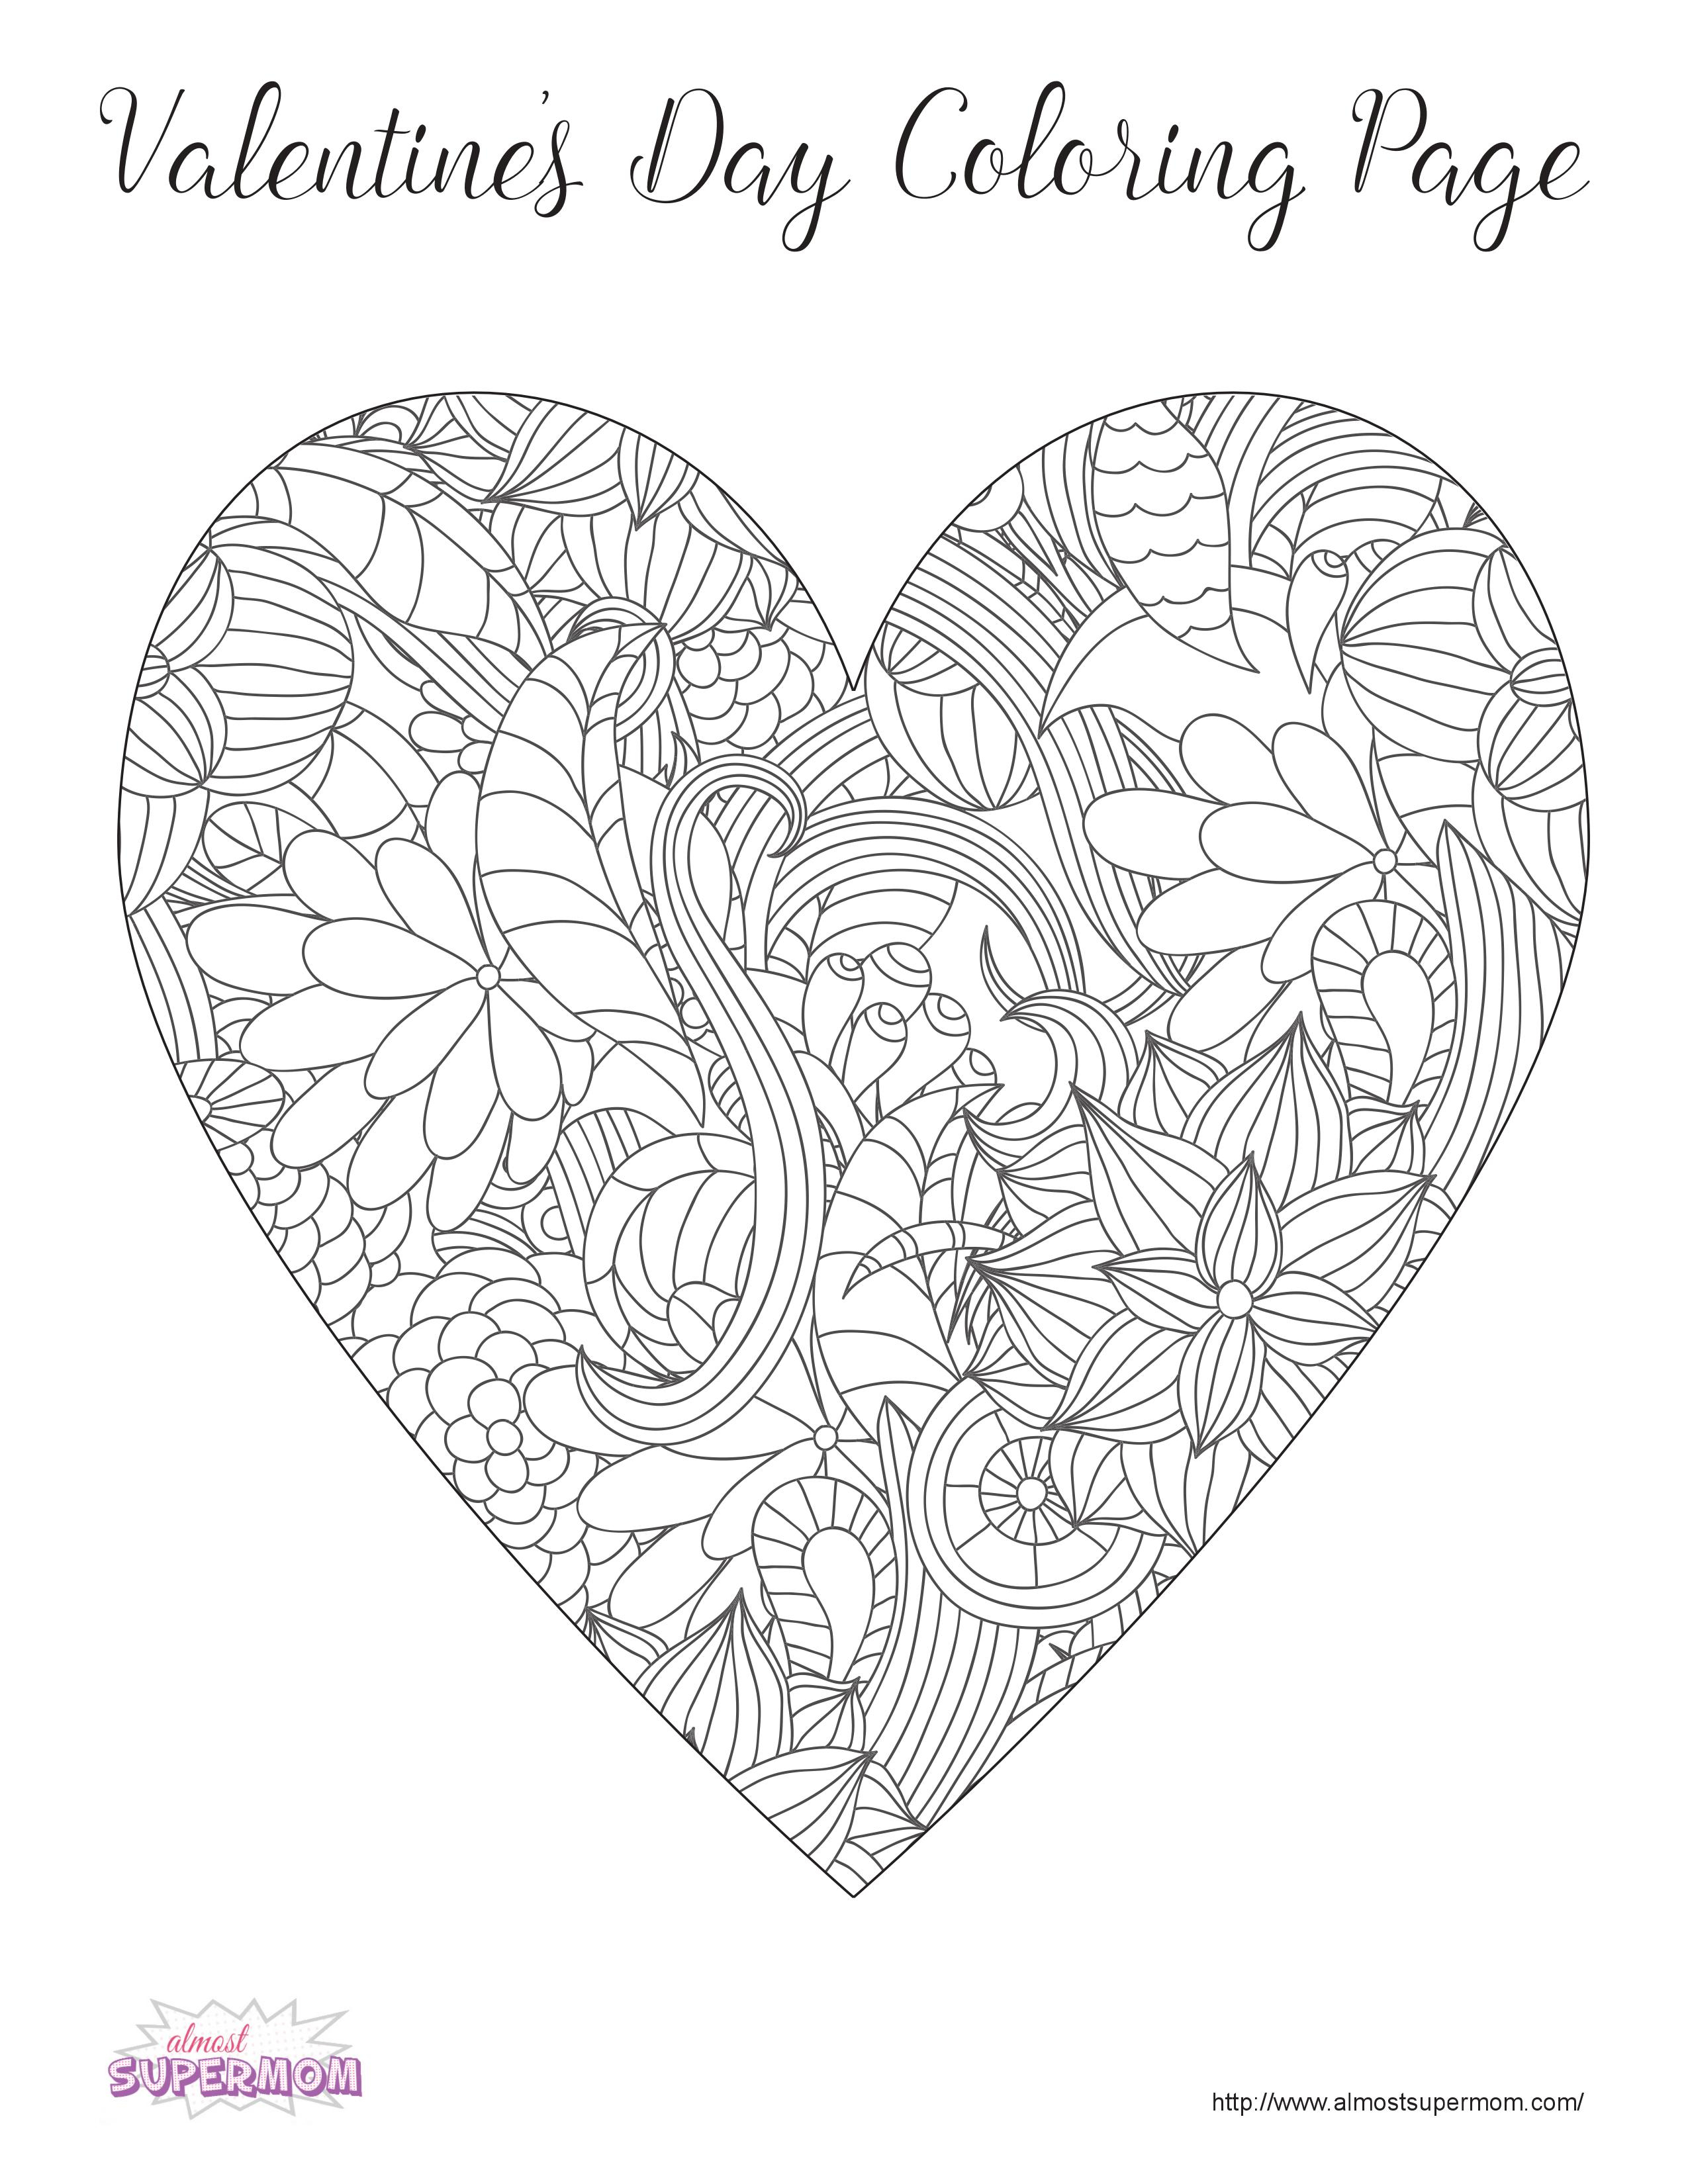 Valentines Day Coloring Page Free Valentines Day Coloring Pages For Grown Ups Almost Supermom